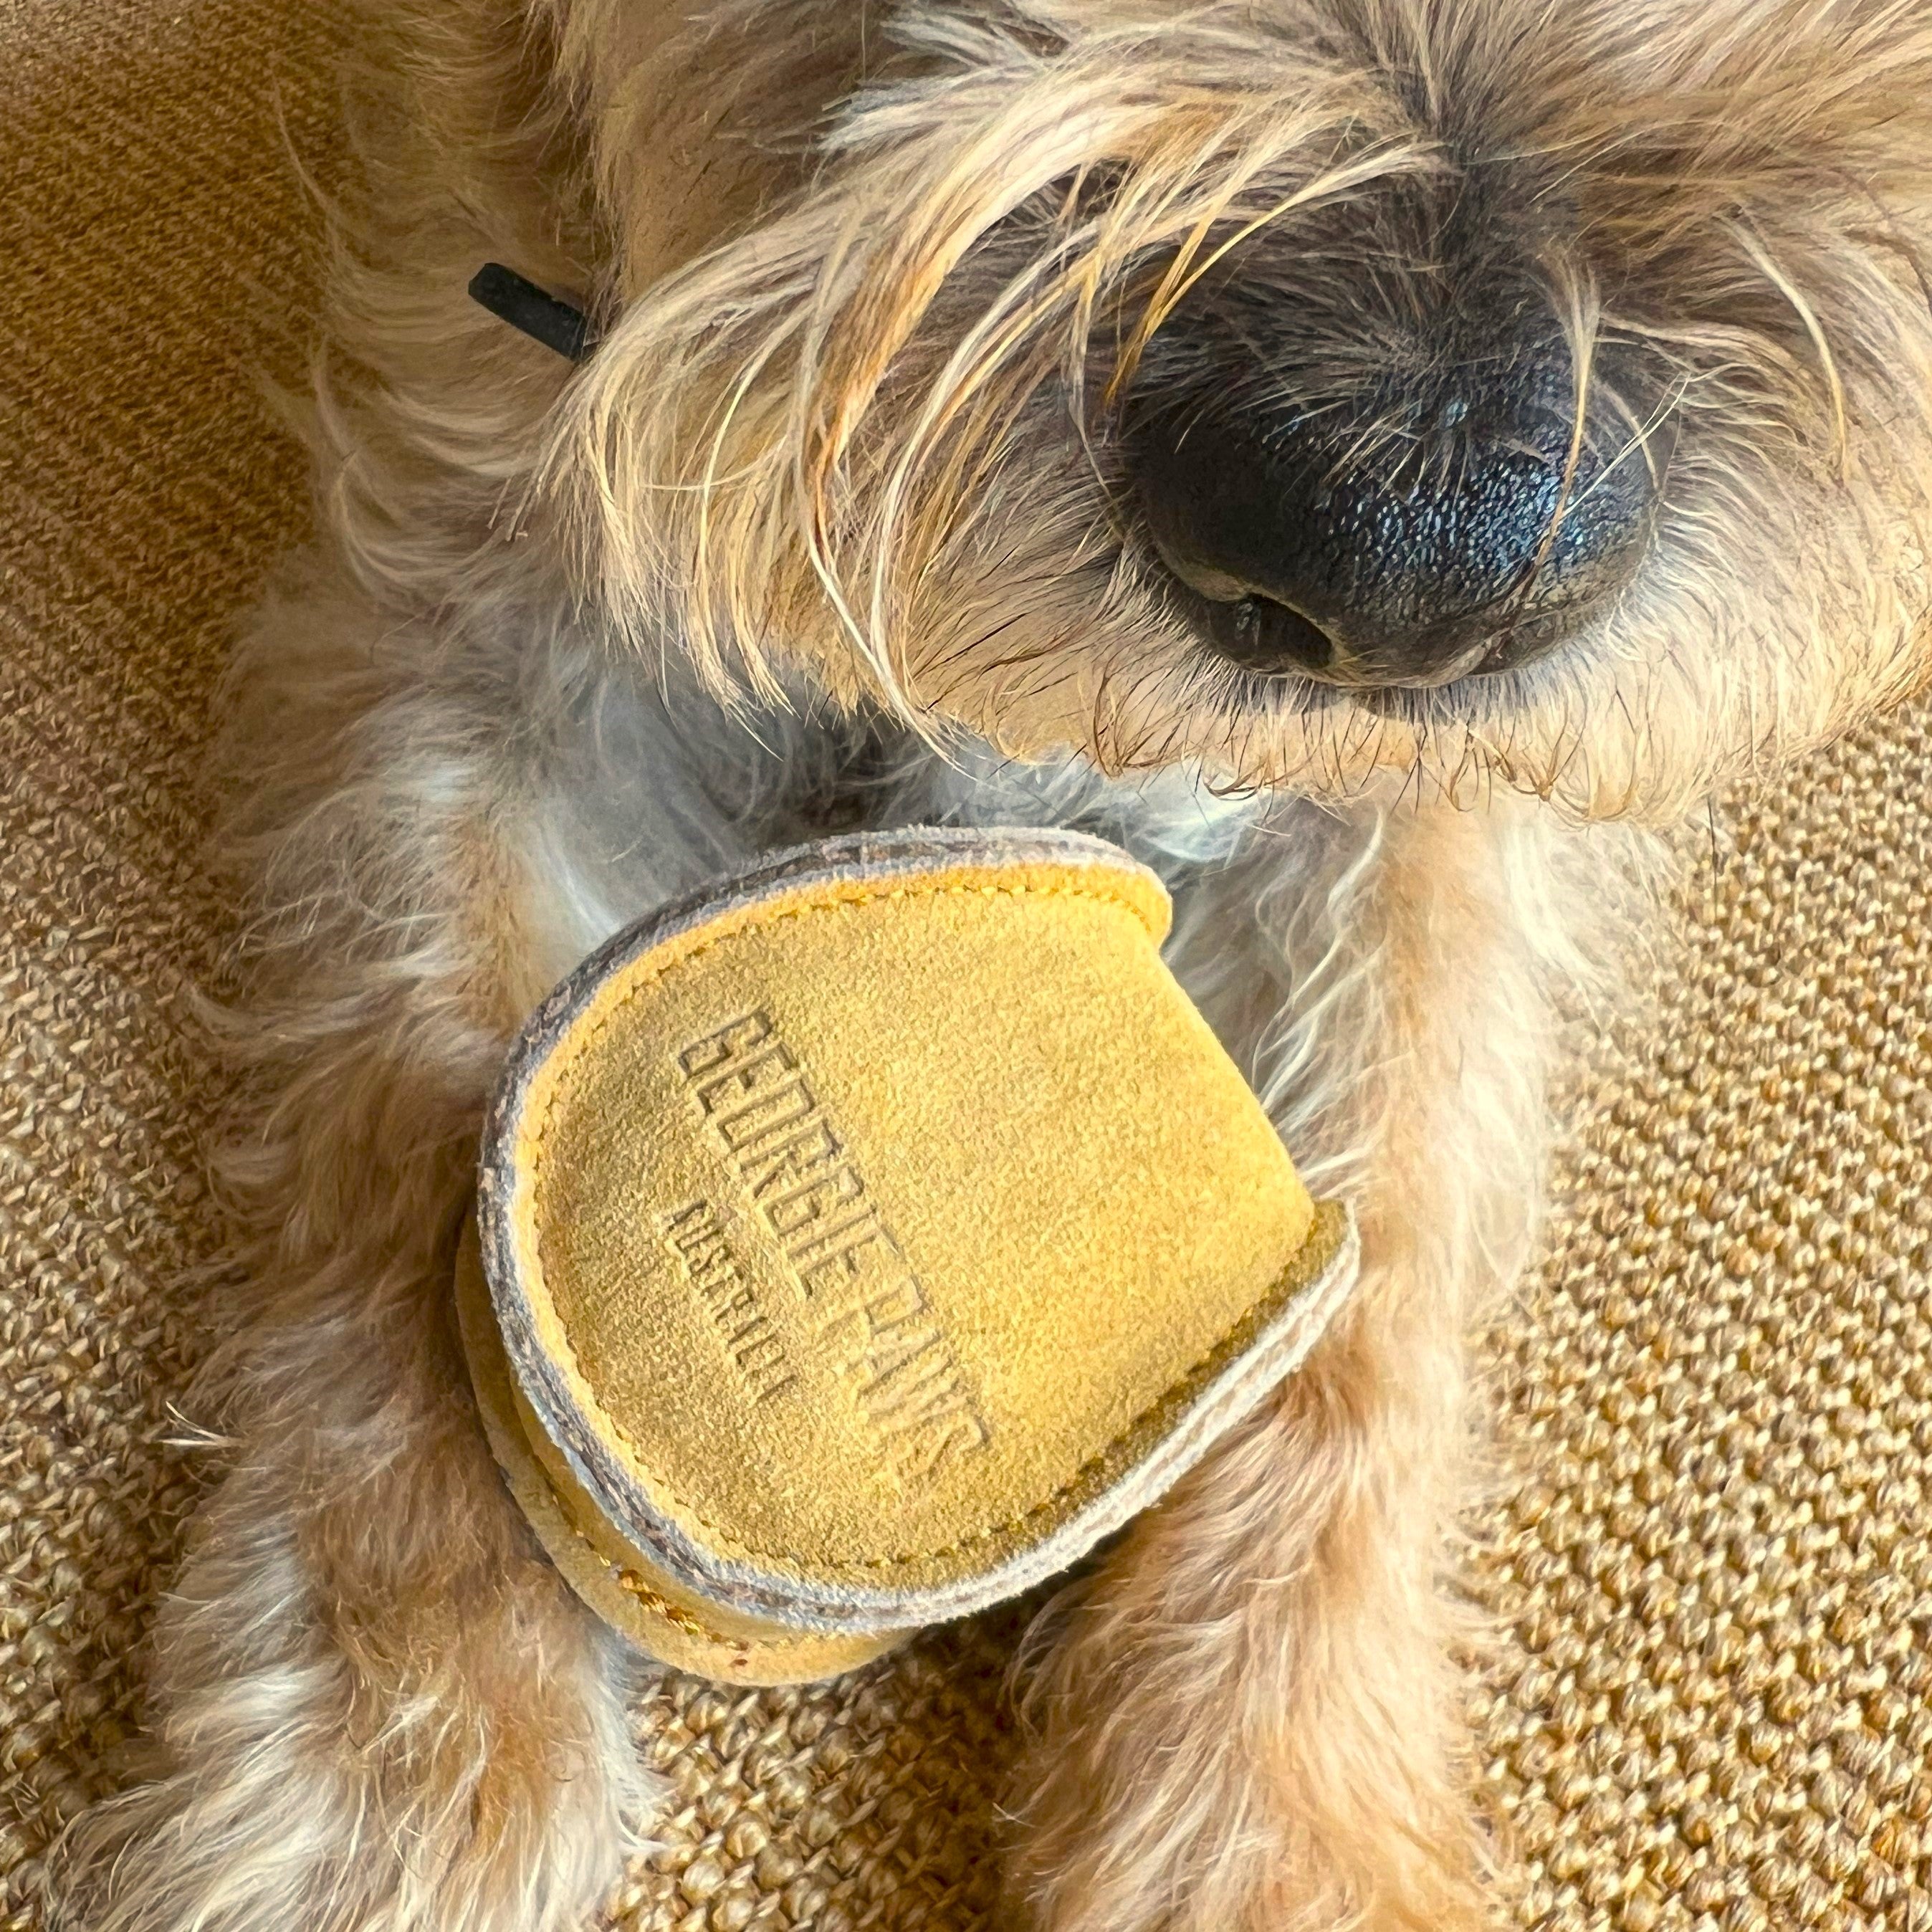 A close-up view shows a small, scruffy dog with light brown fur holding an eco-friendly Georgie Paws Ball - Gold between its paws. The ball has partially visible text that reads "GENERATIVE." The dog is lying on a textured, beige-colored surface. Only the lower part of the dog's face and front paws are visible.